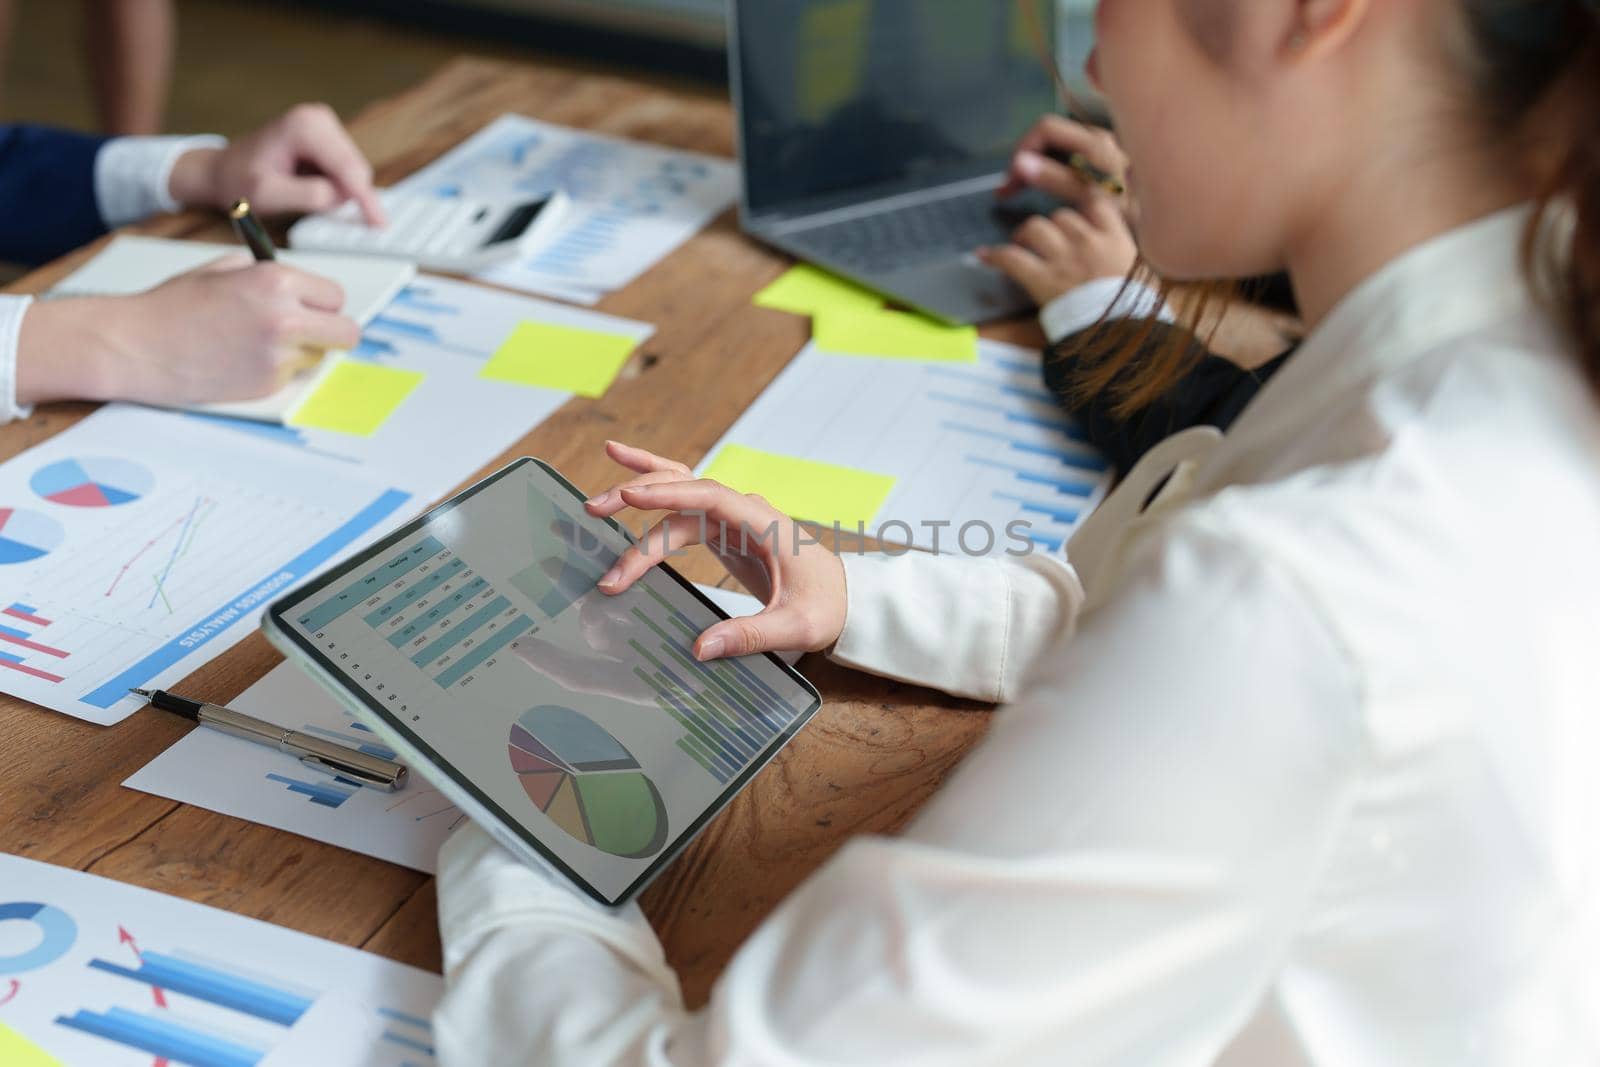 Businesswoman using a tablet to discuss marketing strategy summaries with colleagues in meetings, teamwork, investment planning.